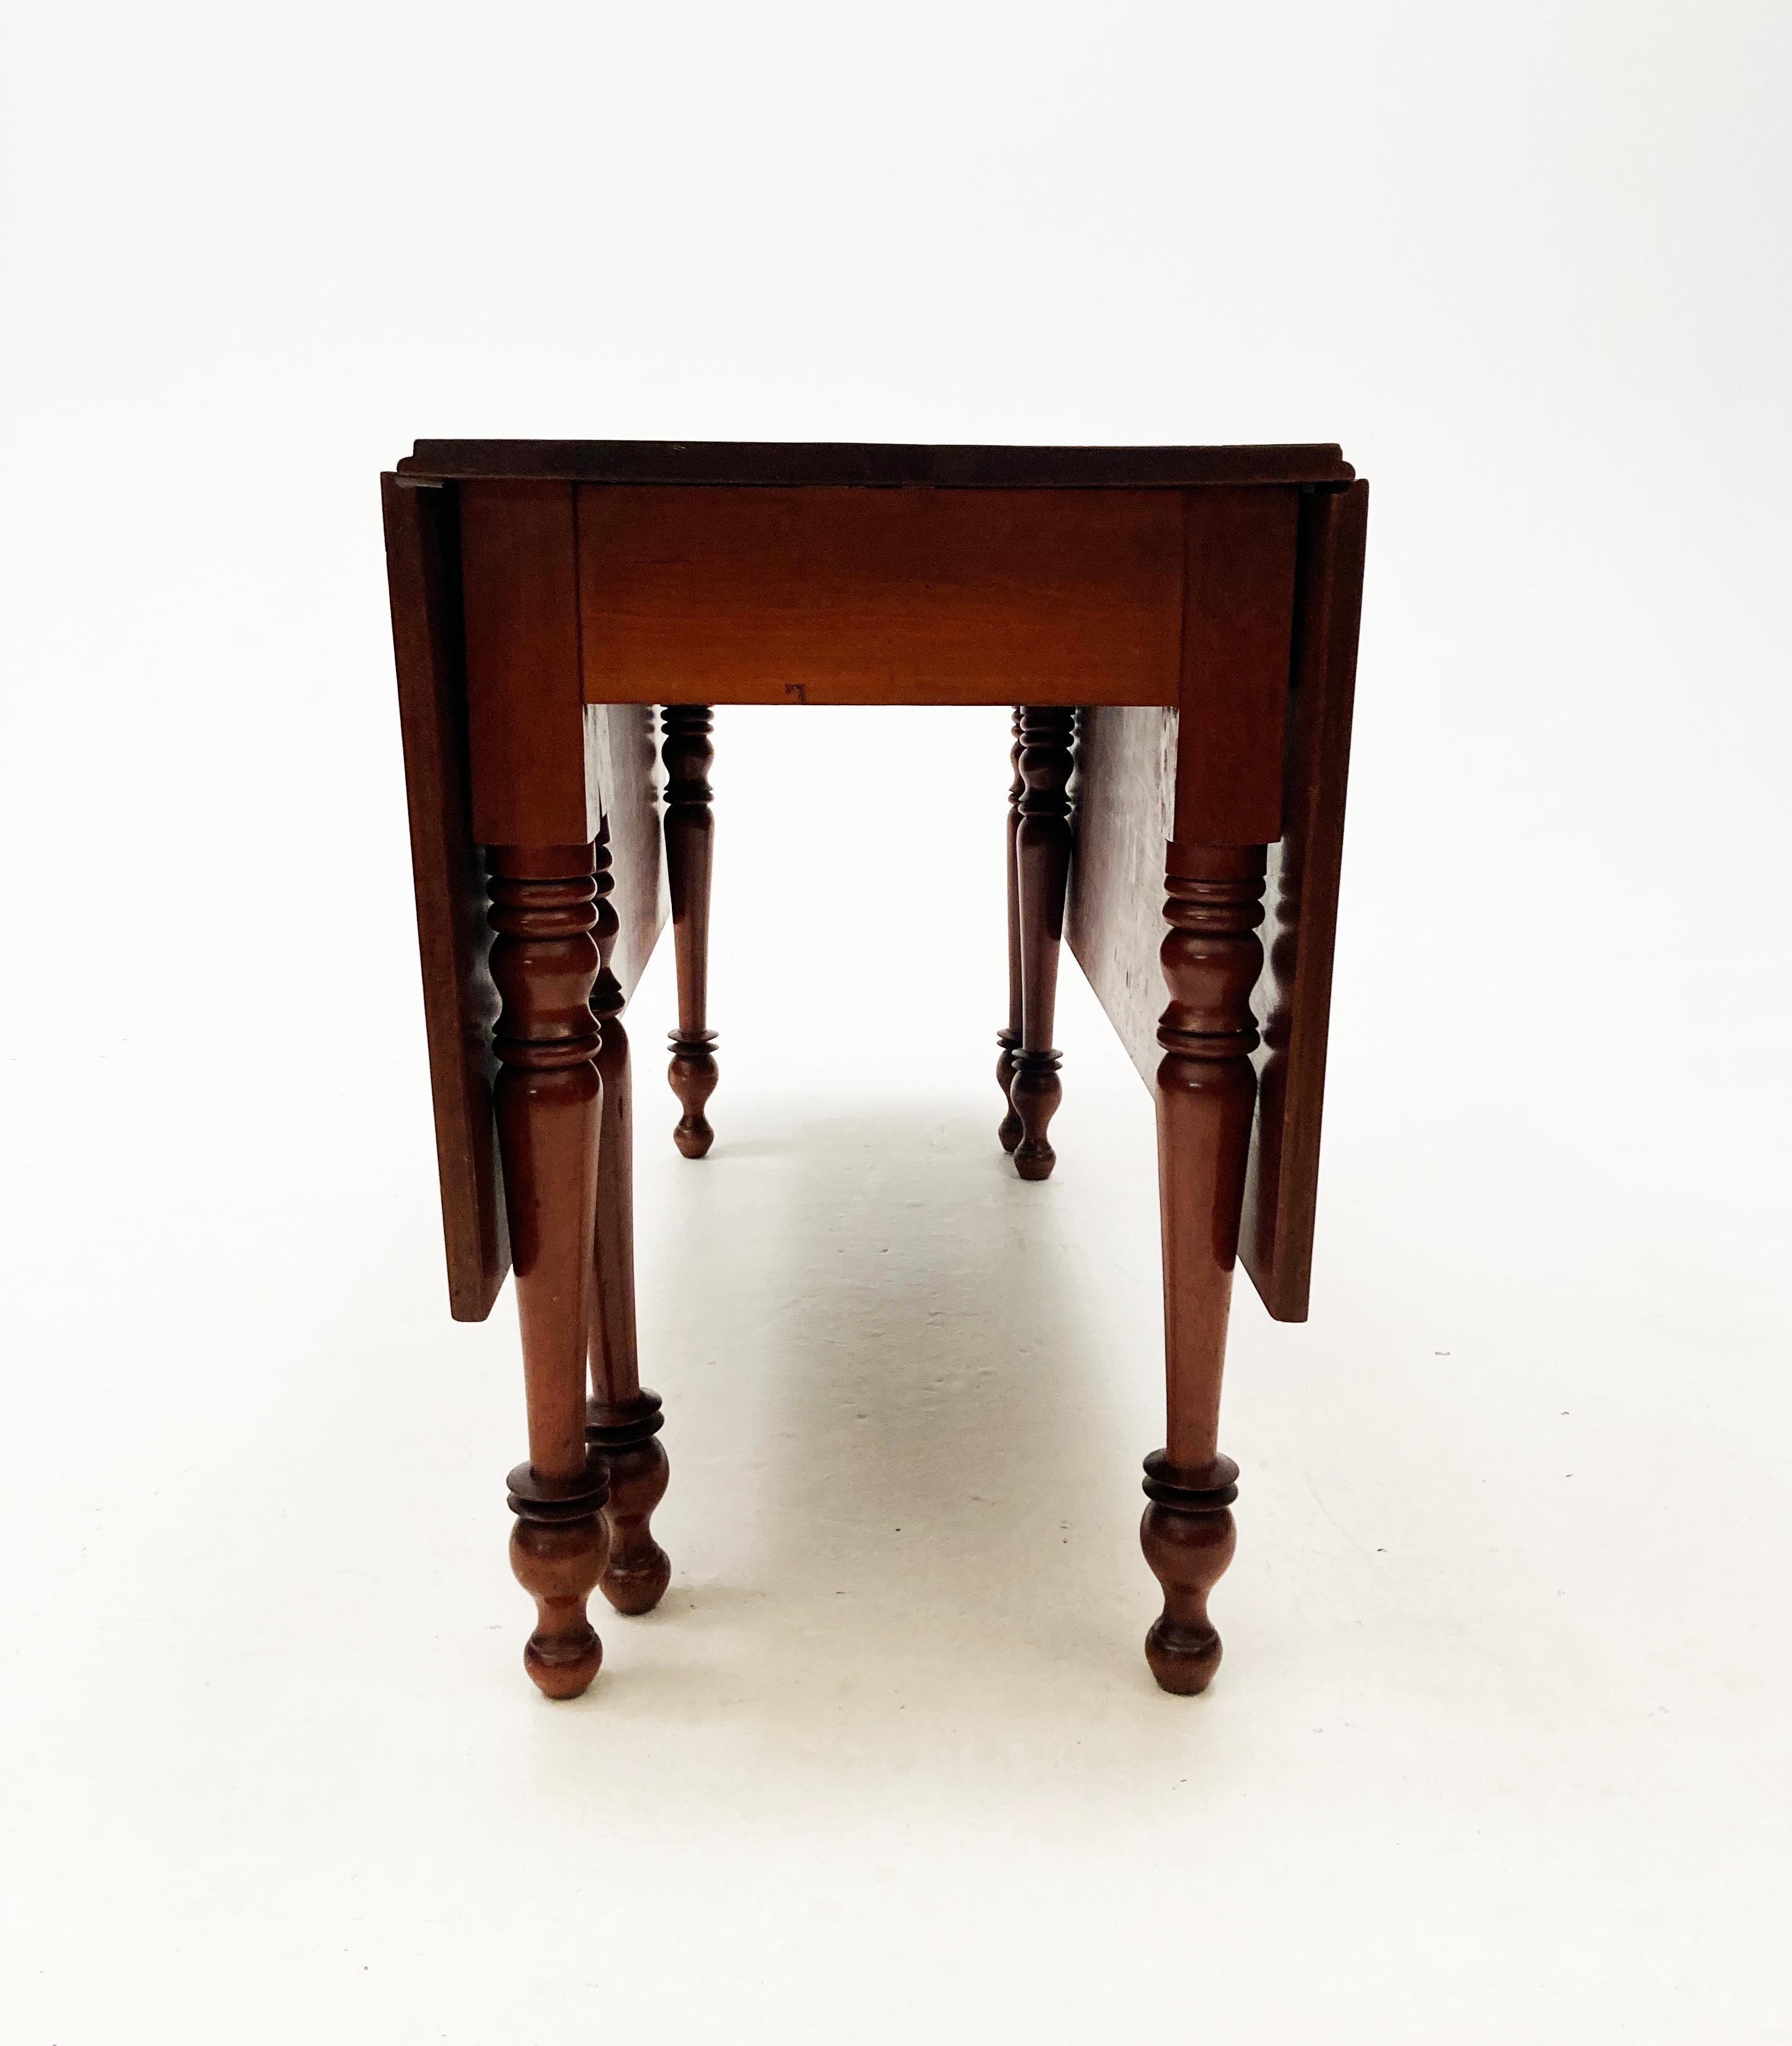 Not your ordinary drop-leaf table, this early 19th century cherry gate-leg, drop-leaf table was hand-planed and hand-turned to create a wonderful dining table that doubles as a console or hall table when the leaves are down. The turned legs are